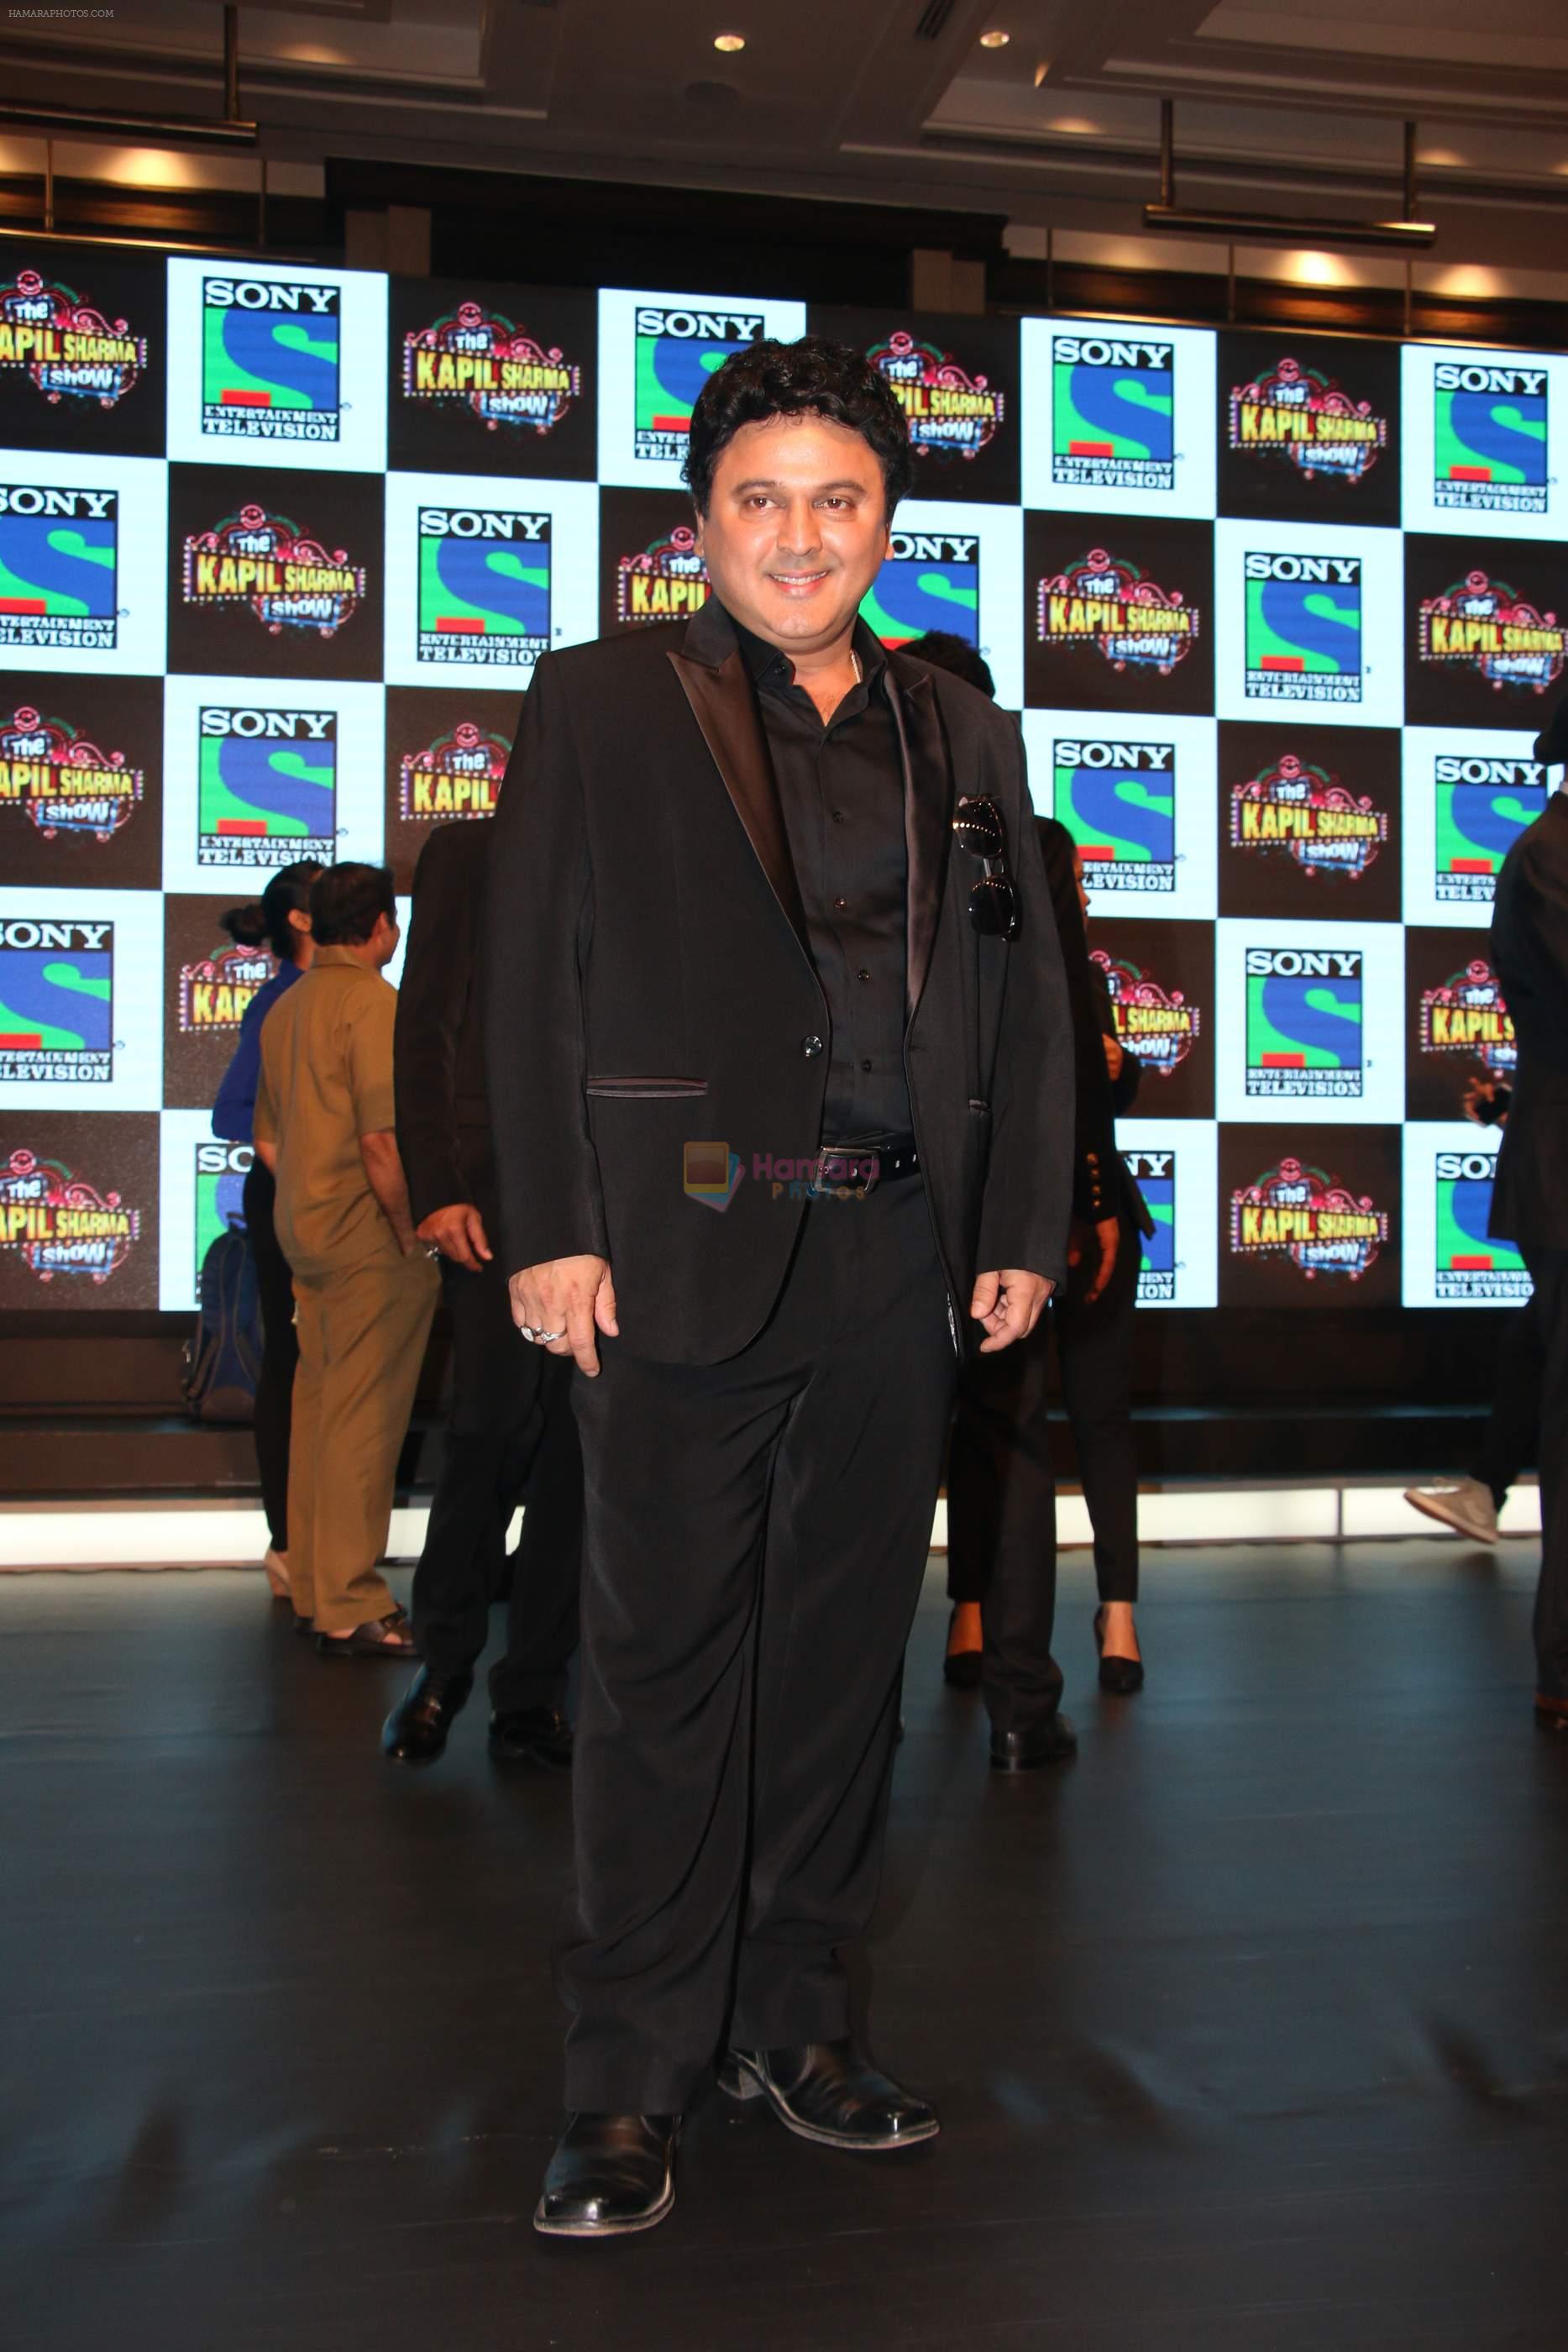 Ali Asgar with Kapil Sharma ties up with Sony with new Show The kapil Sharma Show on 1st March 2016